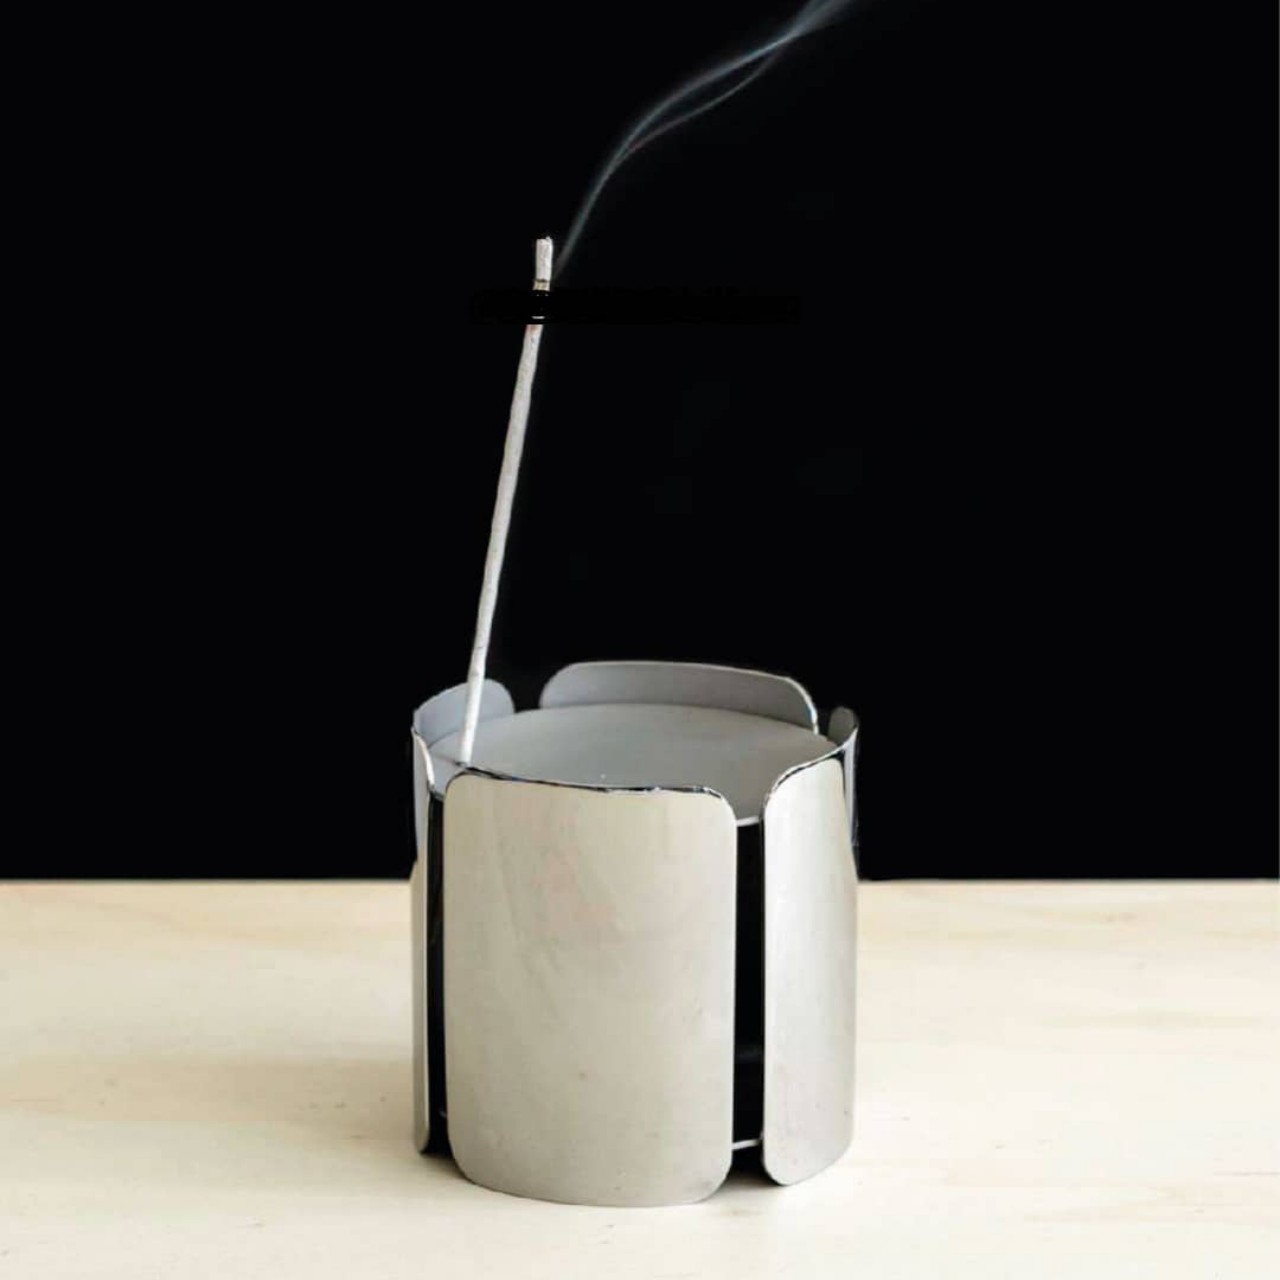 This low-key metal cylinder can take care of all your aromatic needs